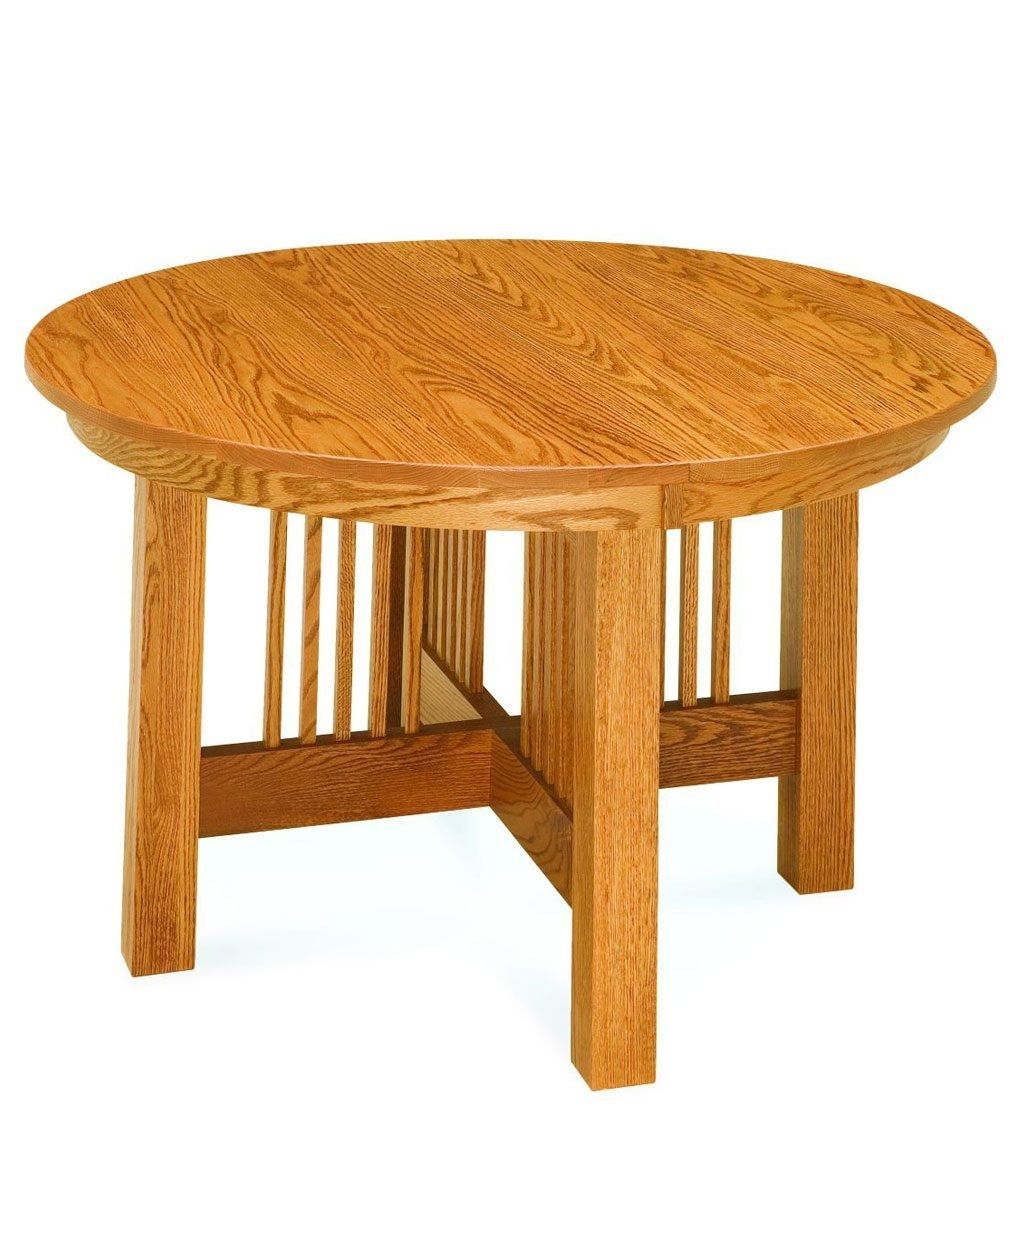 Craftsman Mission Dining Table – Amish Direct Furniture Inside Recent Craftsman Round Dining Tables (View 13 of 20)